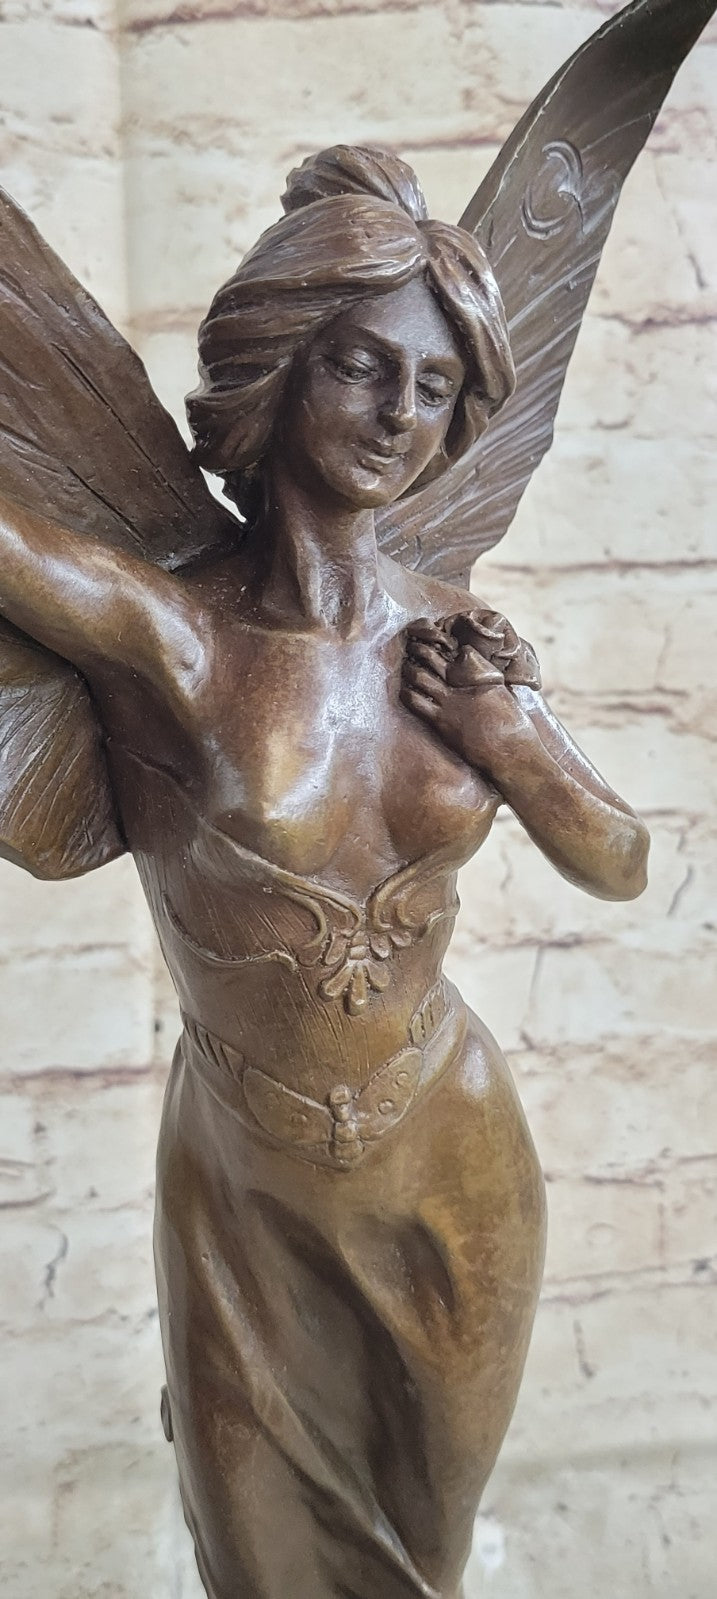 Handcrafted bronze sculpture SALE Angel Butterfly Fairy Reproduction Deco Art